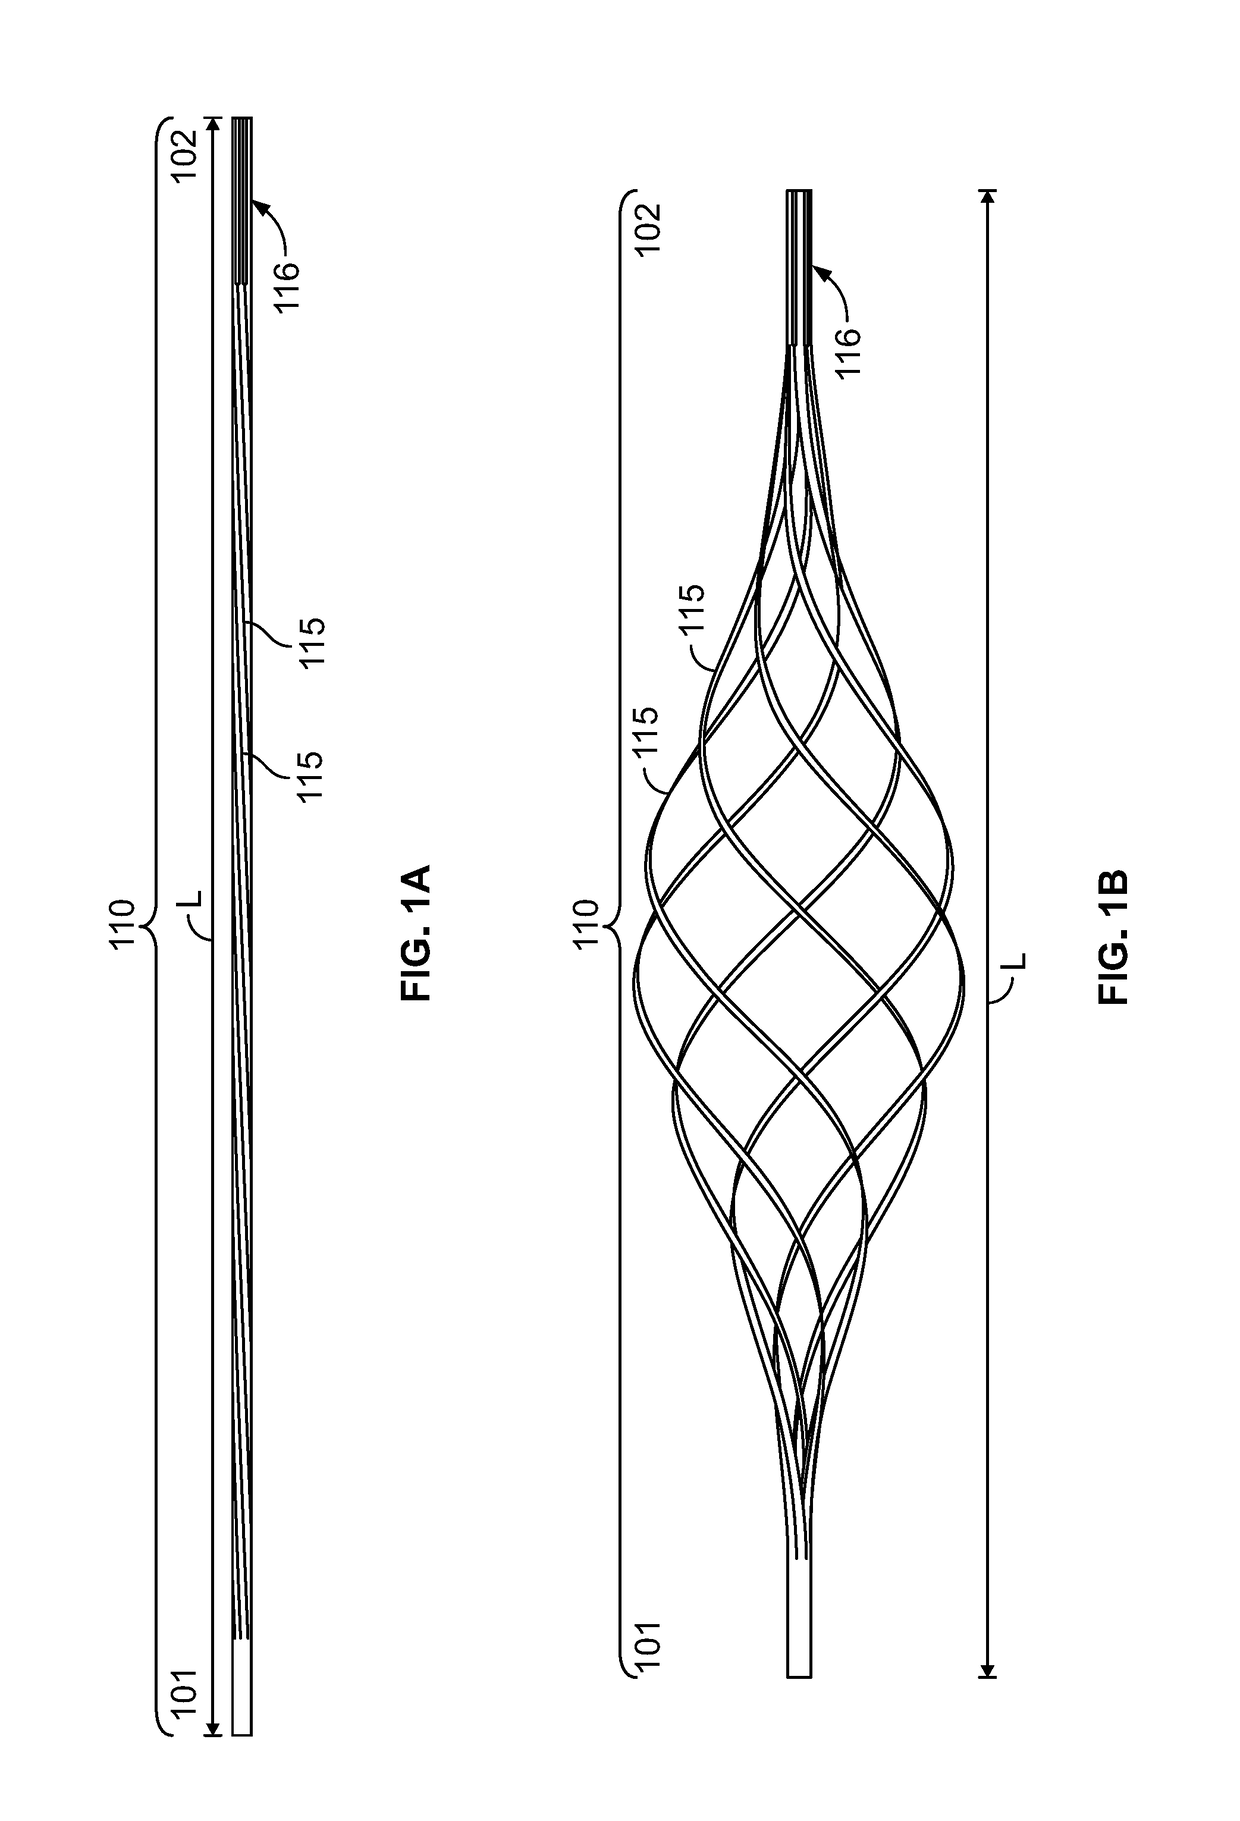 Basket for a catheter device